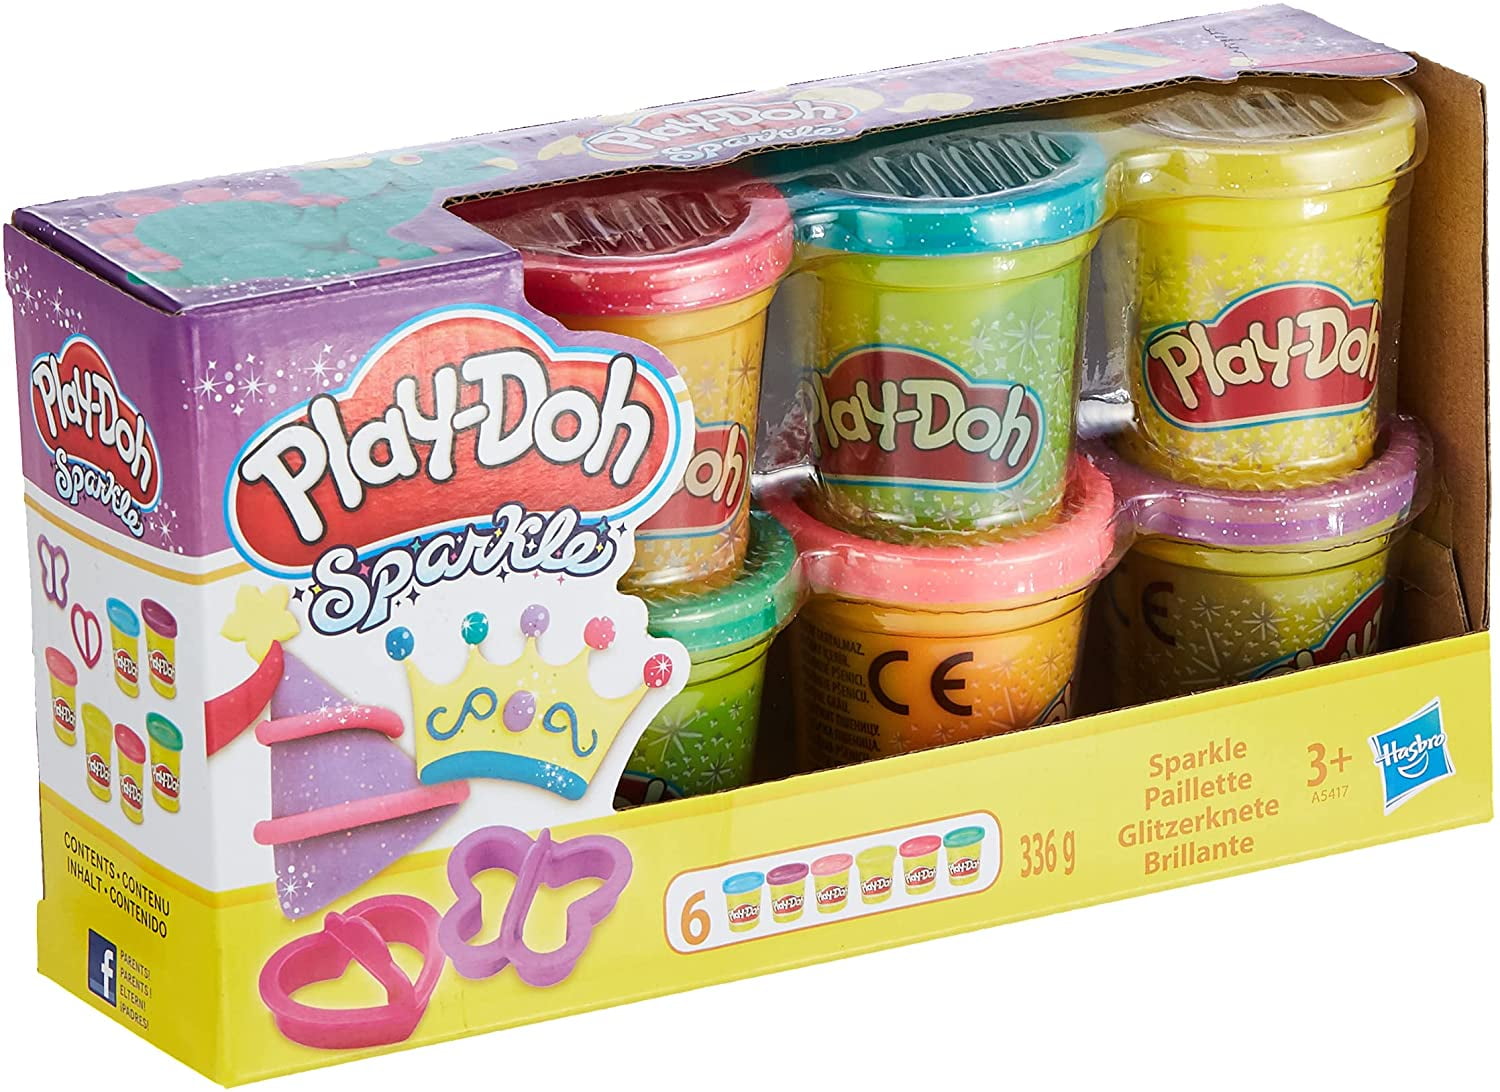 BUTTERFLY CUTTER HEART CUTTER W/ 6 CANS PLAY-DOH SPARKLE COMPOUND AGE 3+ 